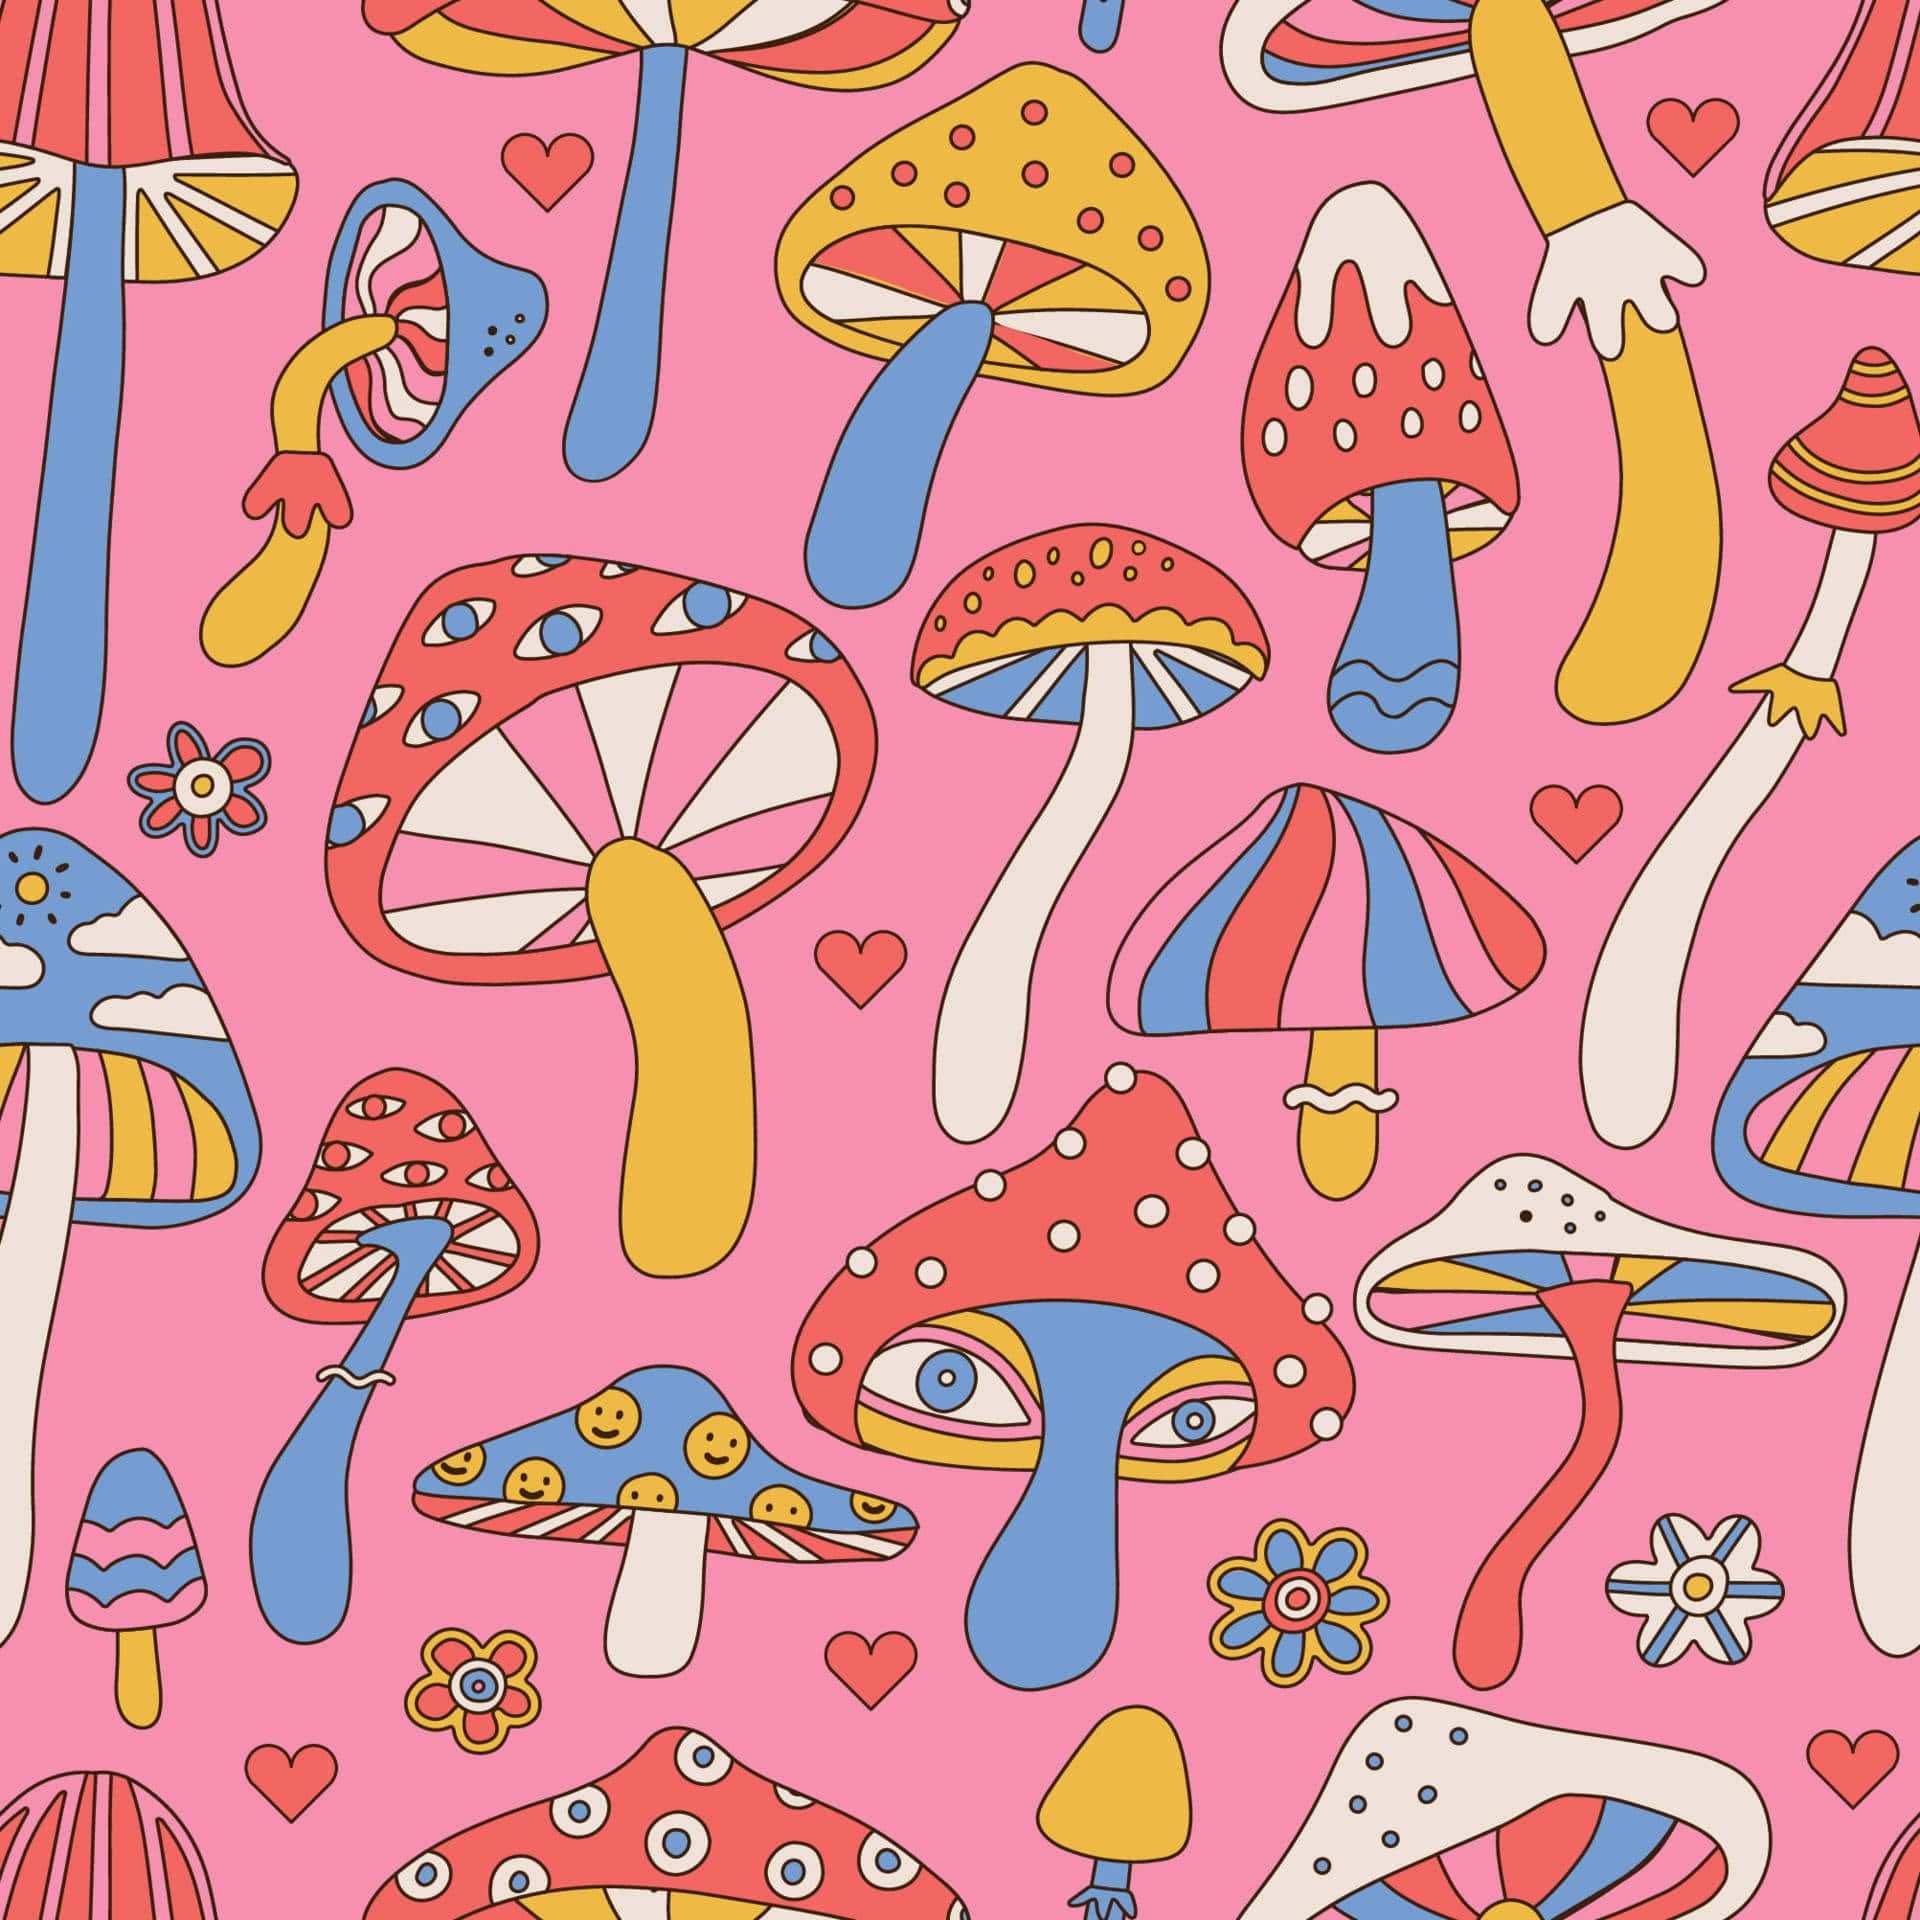 Explore the Psychedelic Hues of Trippy Mushroom Wallpaper